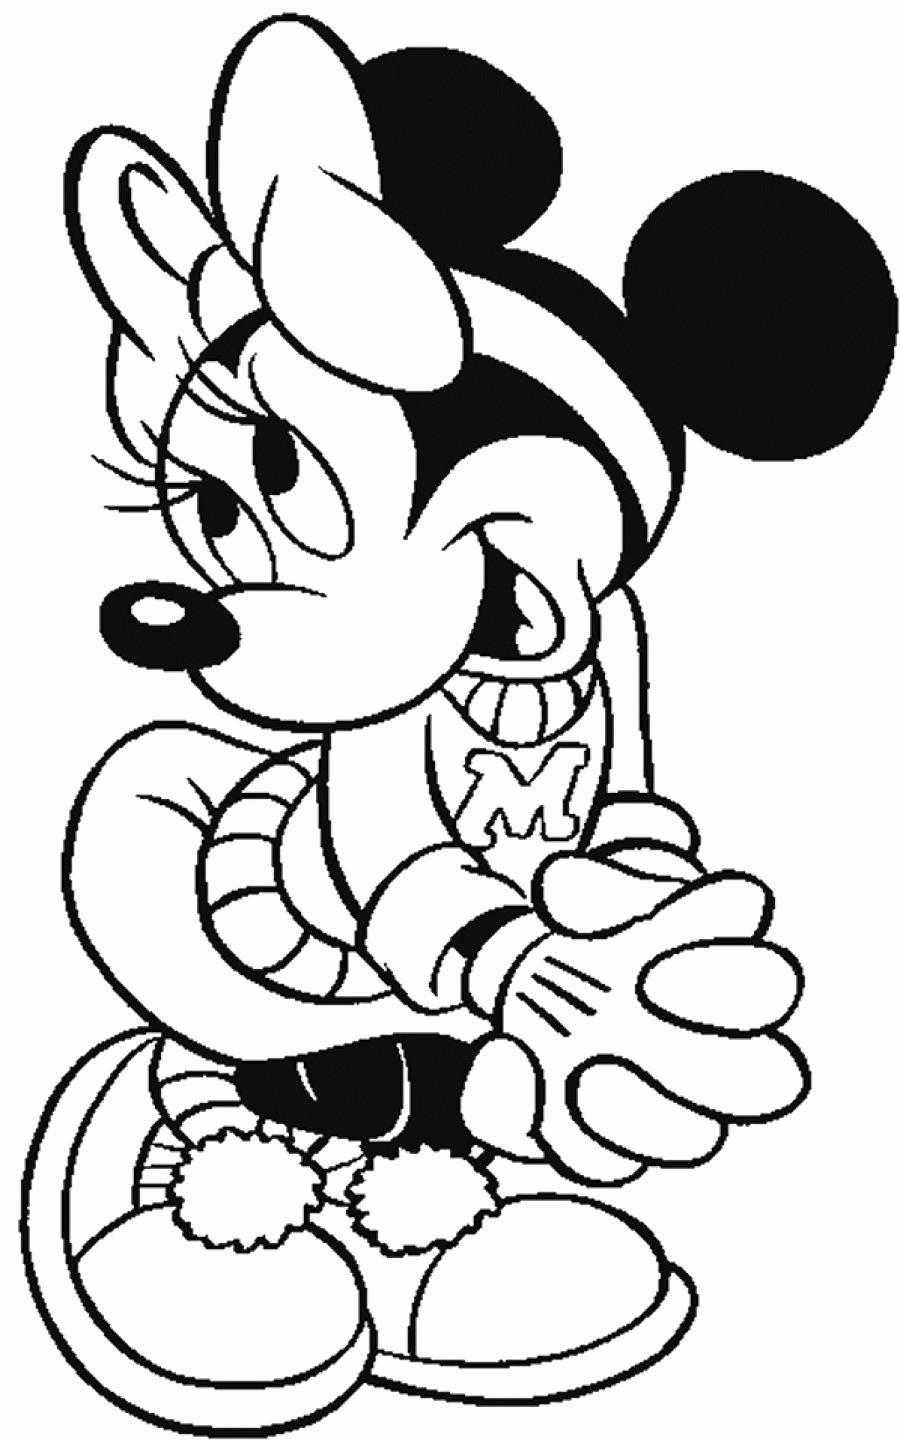 Free Printable Minnie Mouse Coloring Pages
 Mickey And Minnie Mouse Coloring Pages To Print For Free